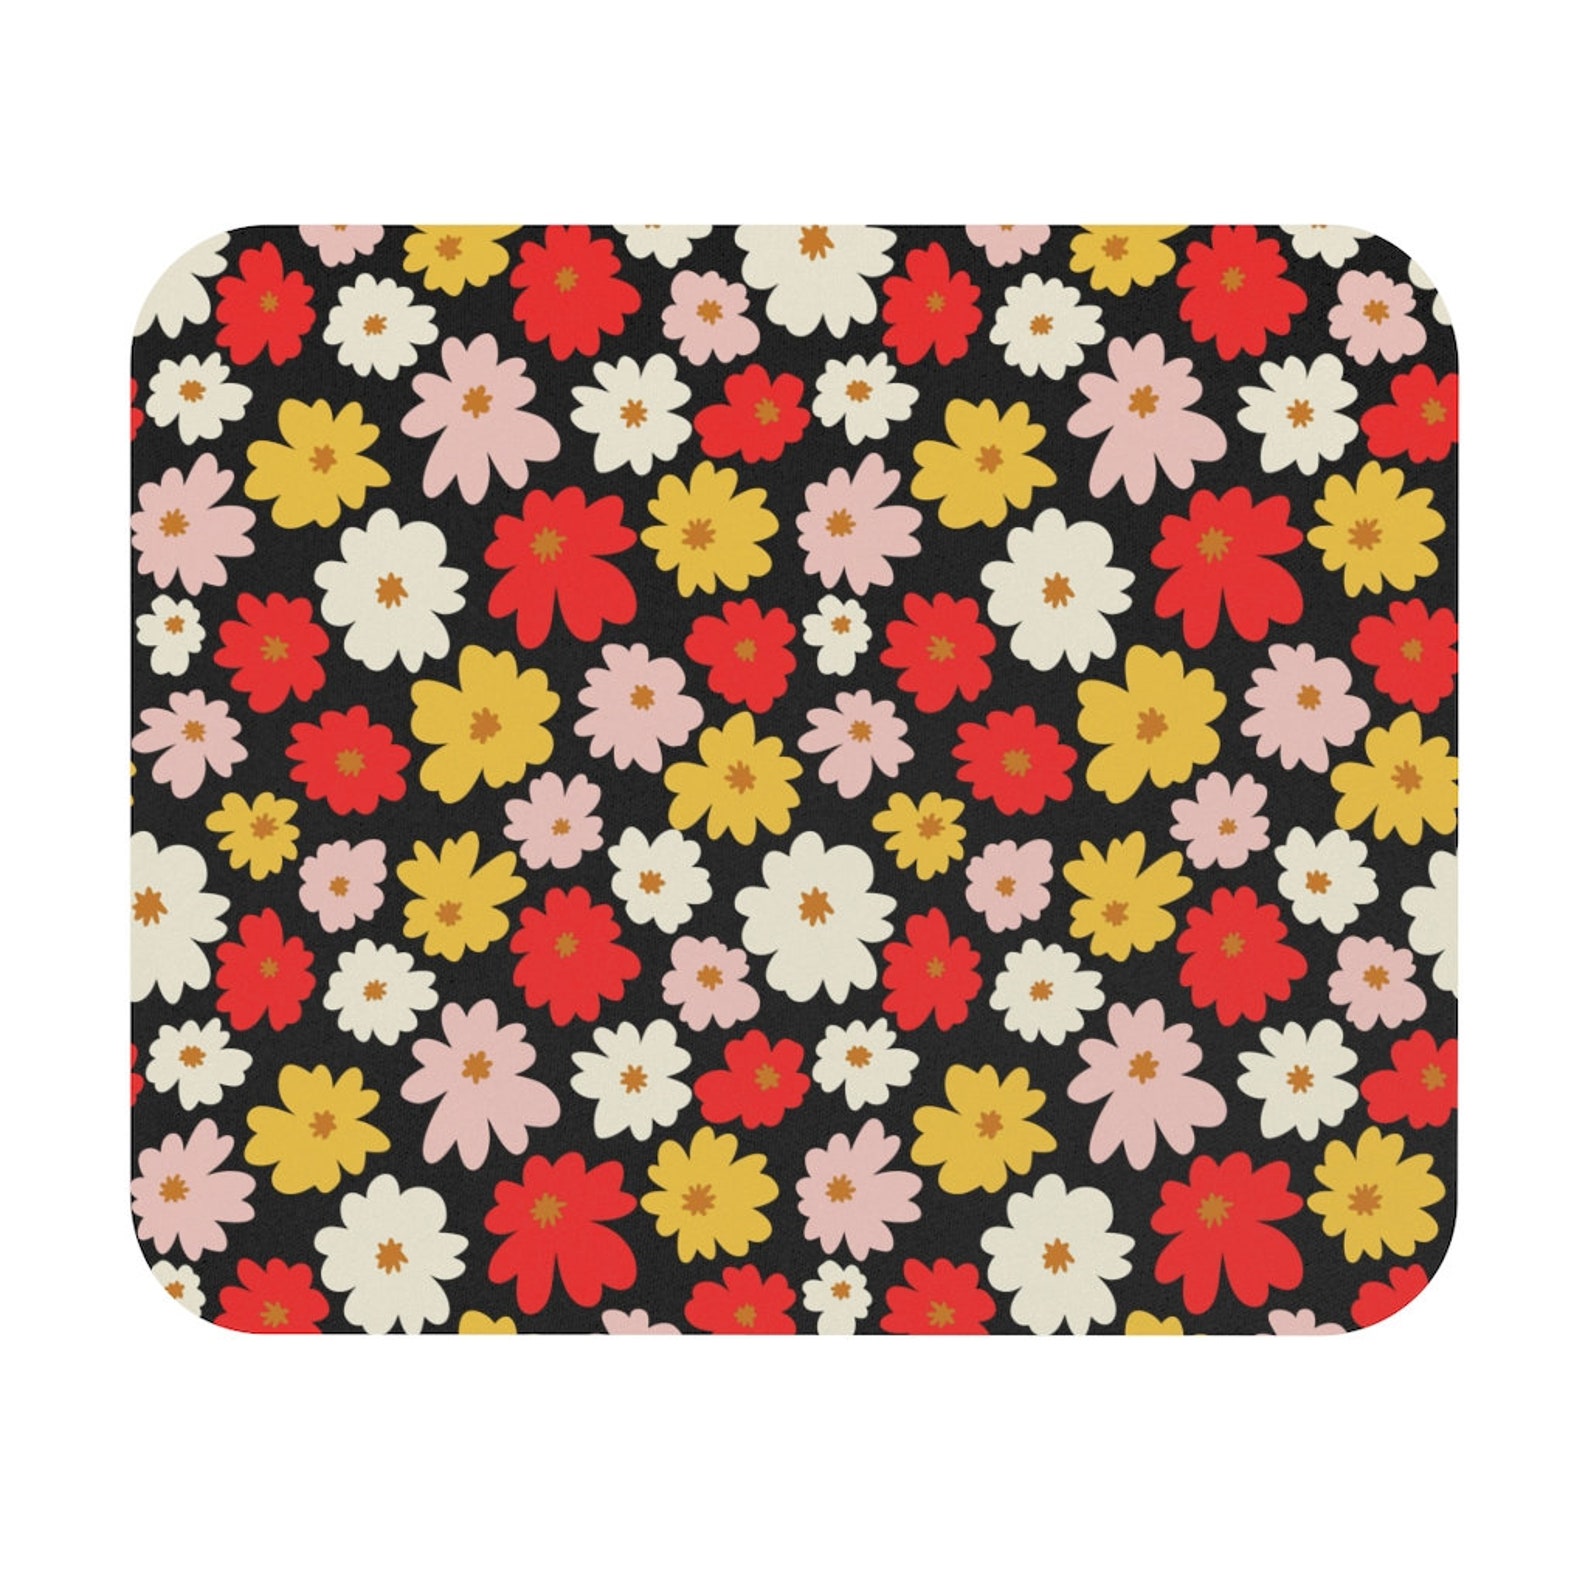 Daisy Mouse Pad Flower Mouse Pad Colorful Mouse Pad Home | Etsy